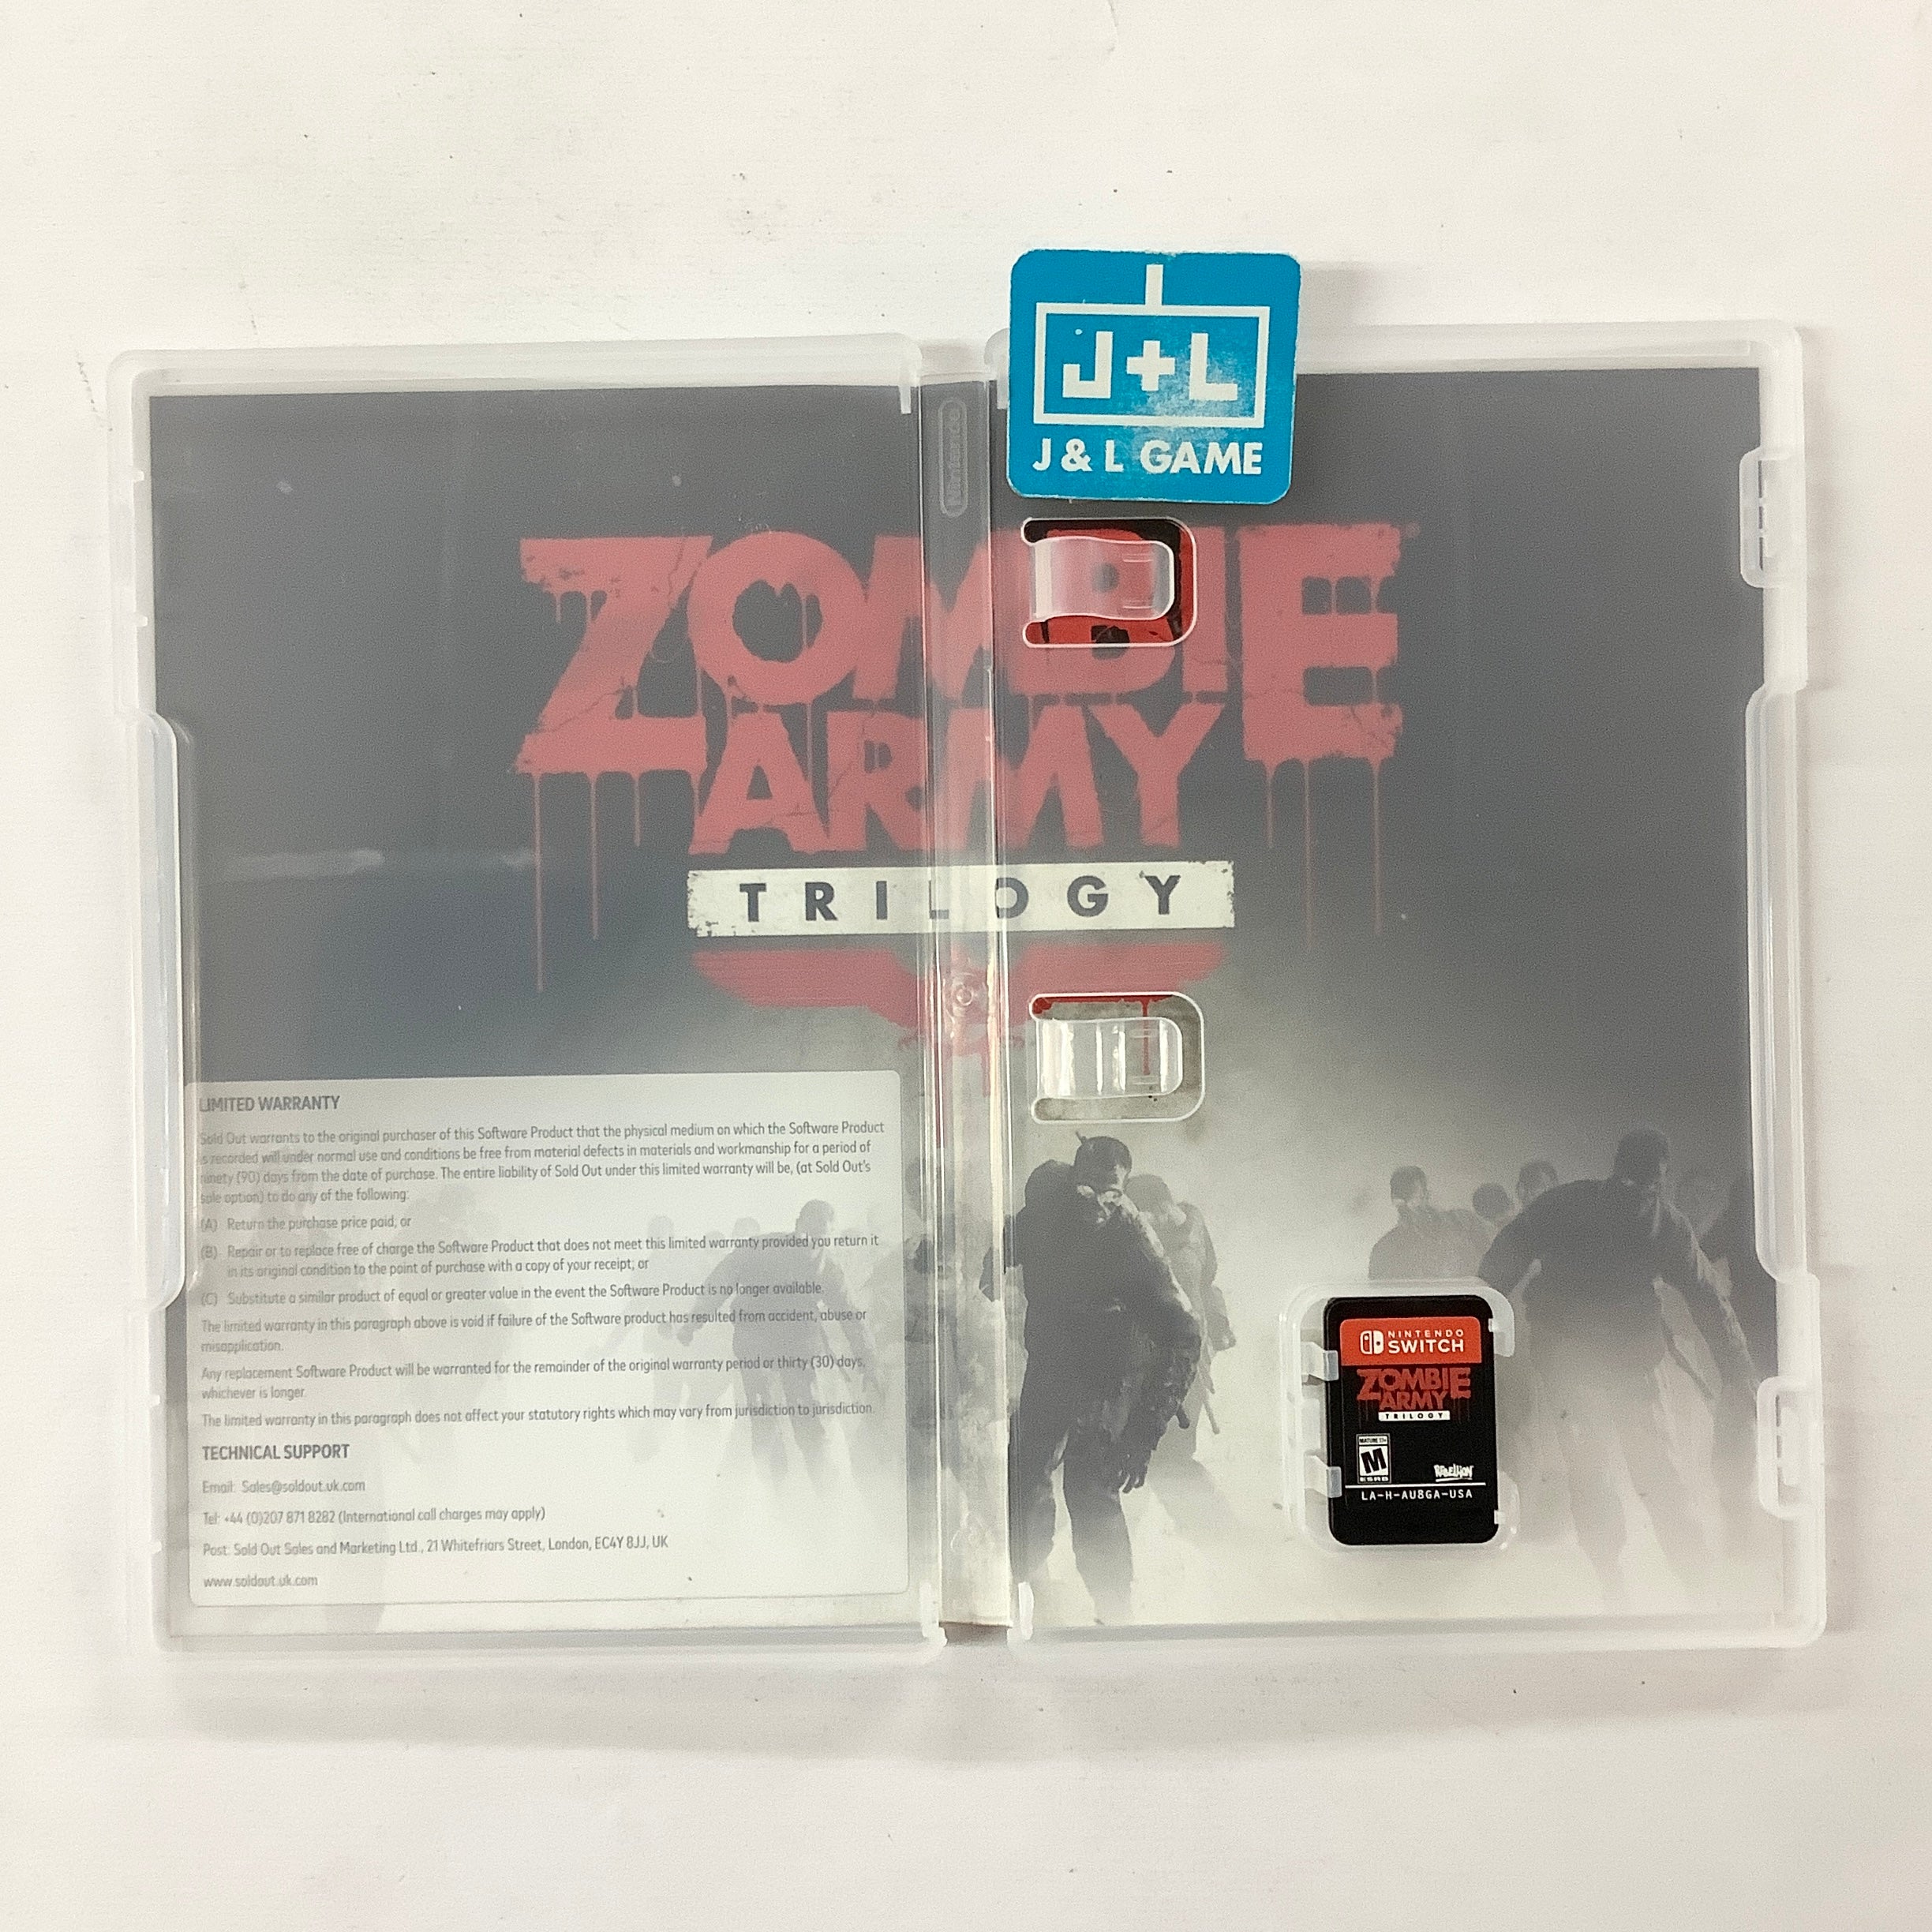 Zombie Army Trilogy - (NSW) Nintendo Switch [Pre-Owned] Video Games Sold Out   